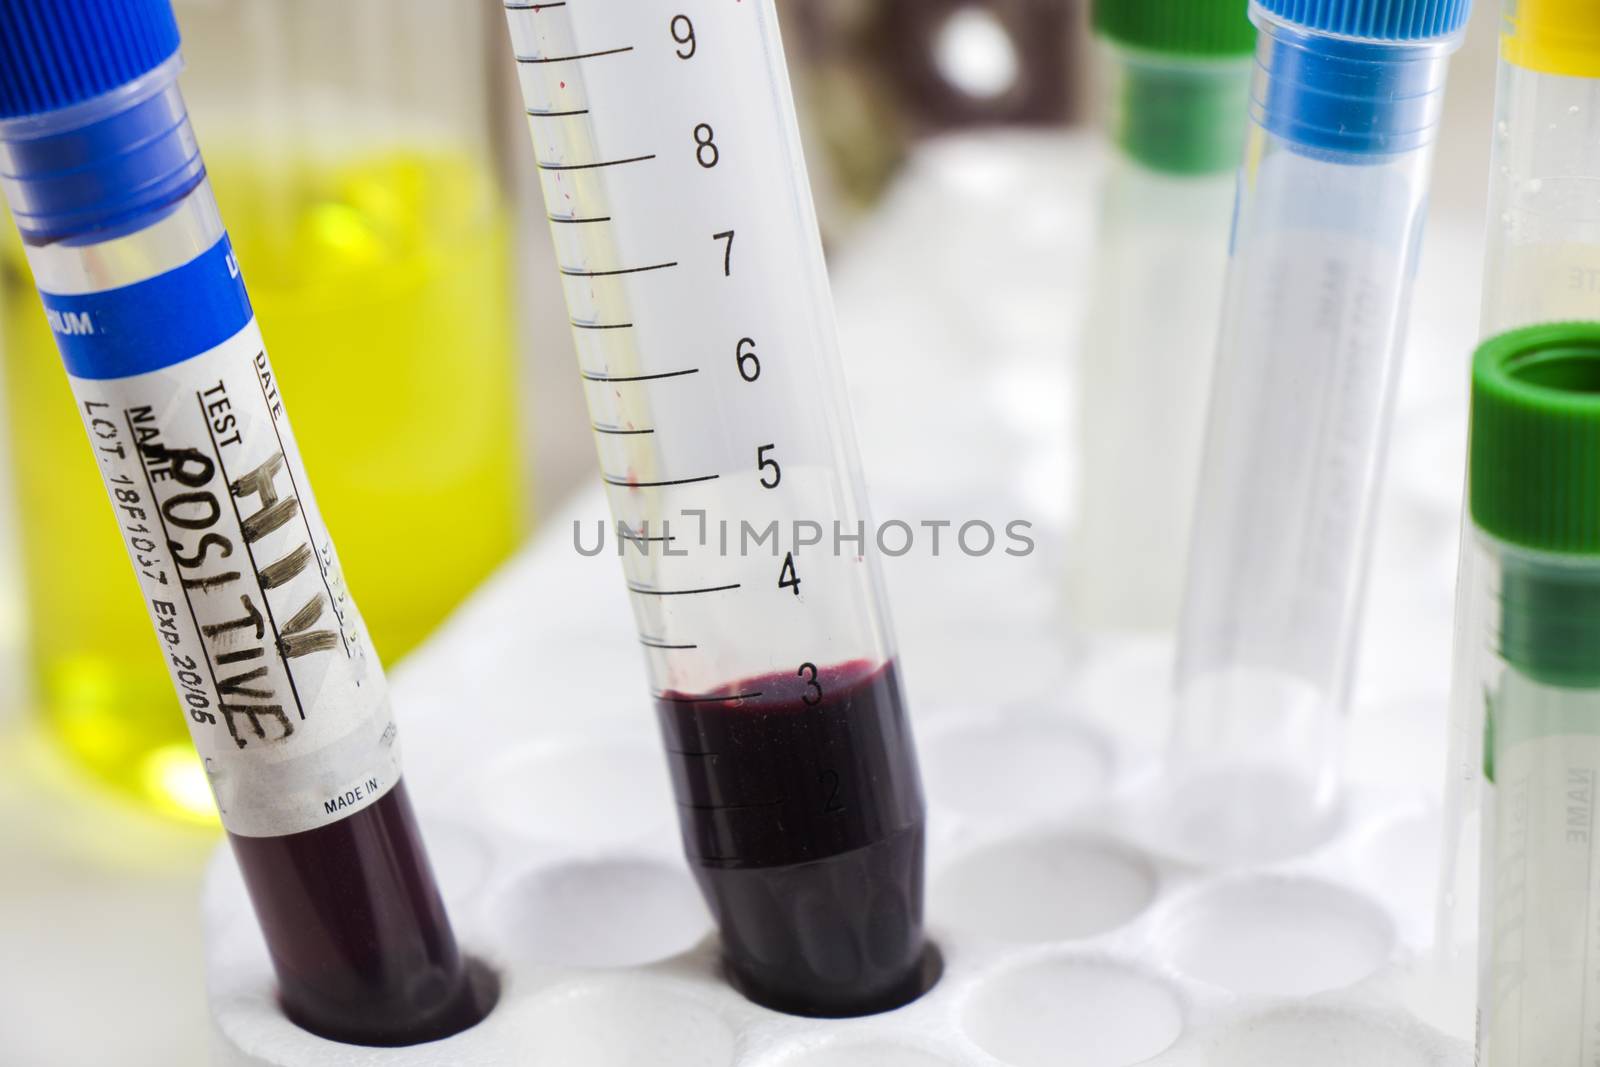 Hiv and aids infection blood test sample, diagnoses and laboratory chemical liquid elements by Taidundua